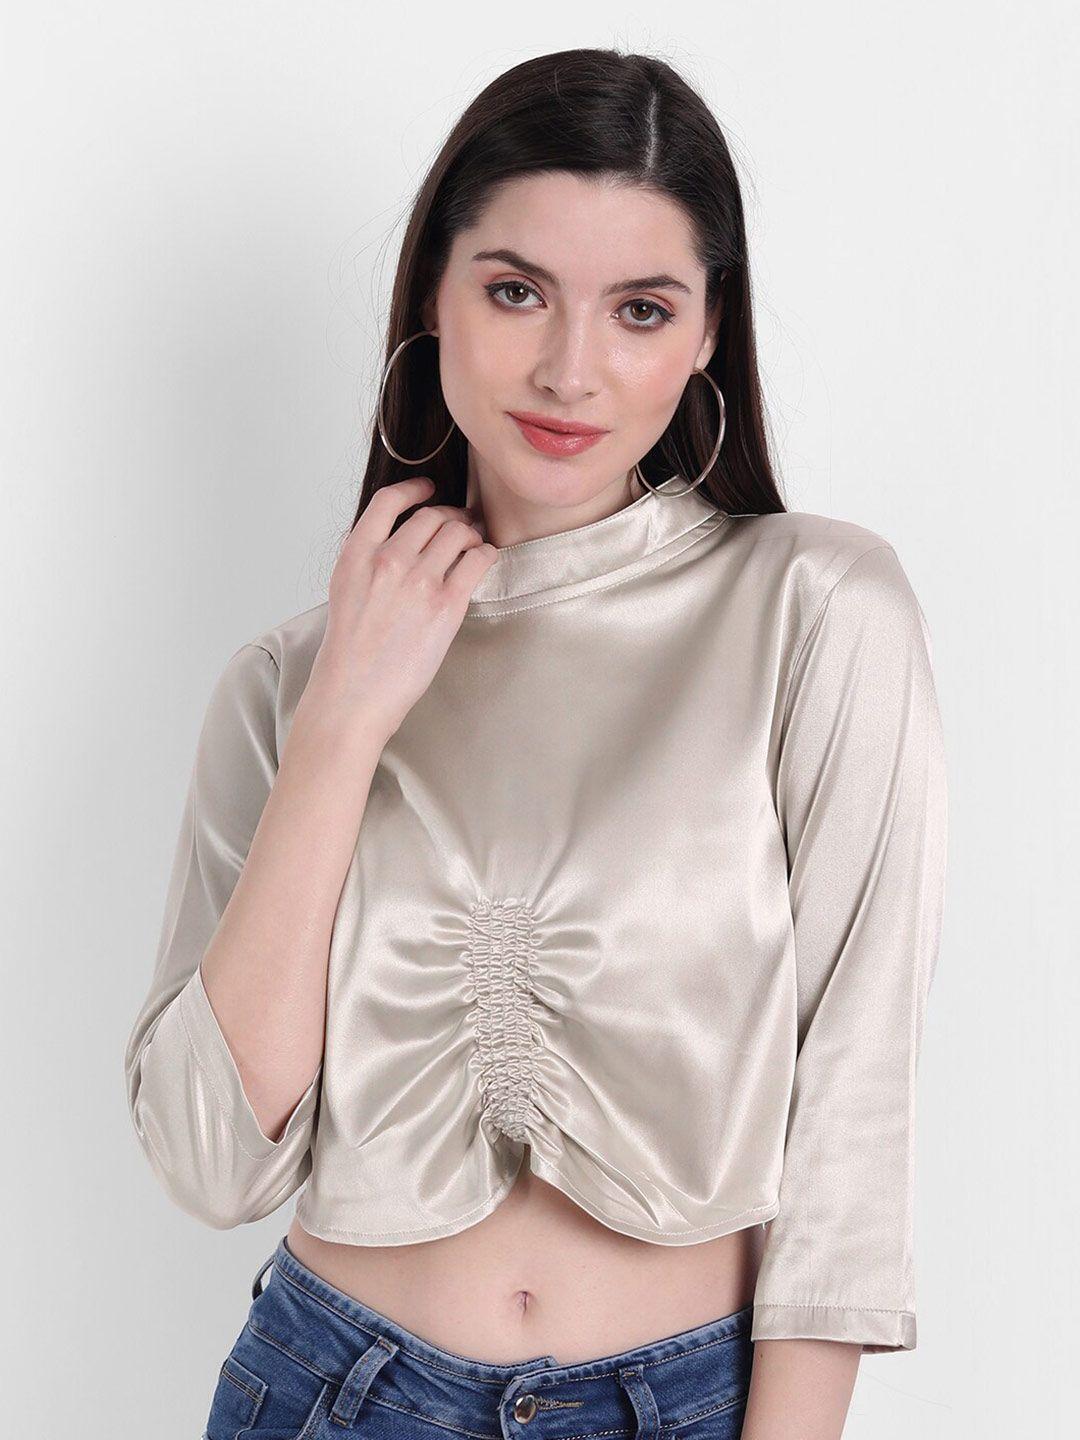 rediscover fashion women silver-toned satin ruched crop top